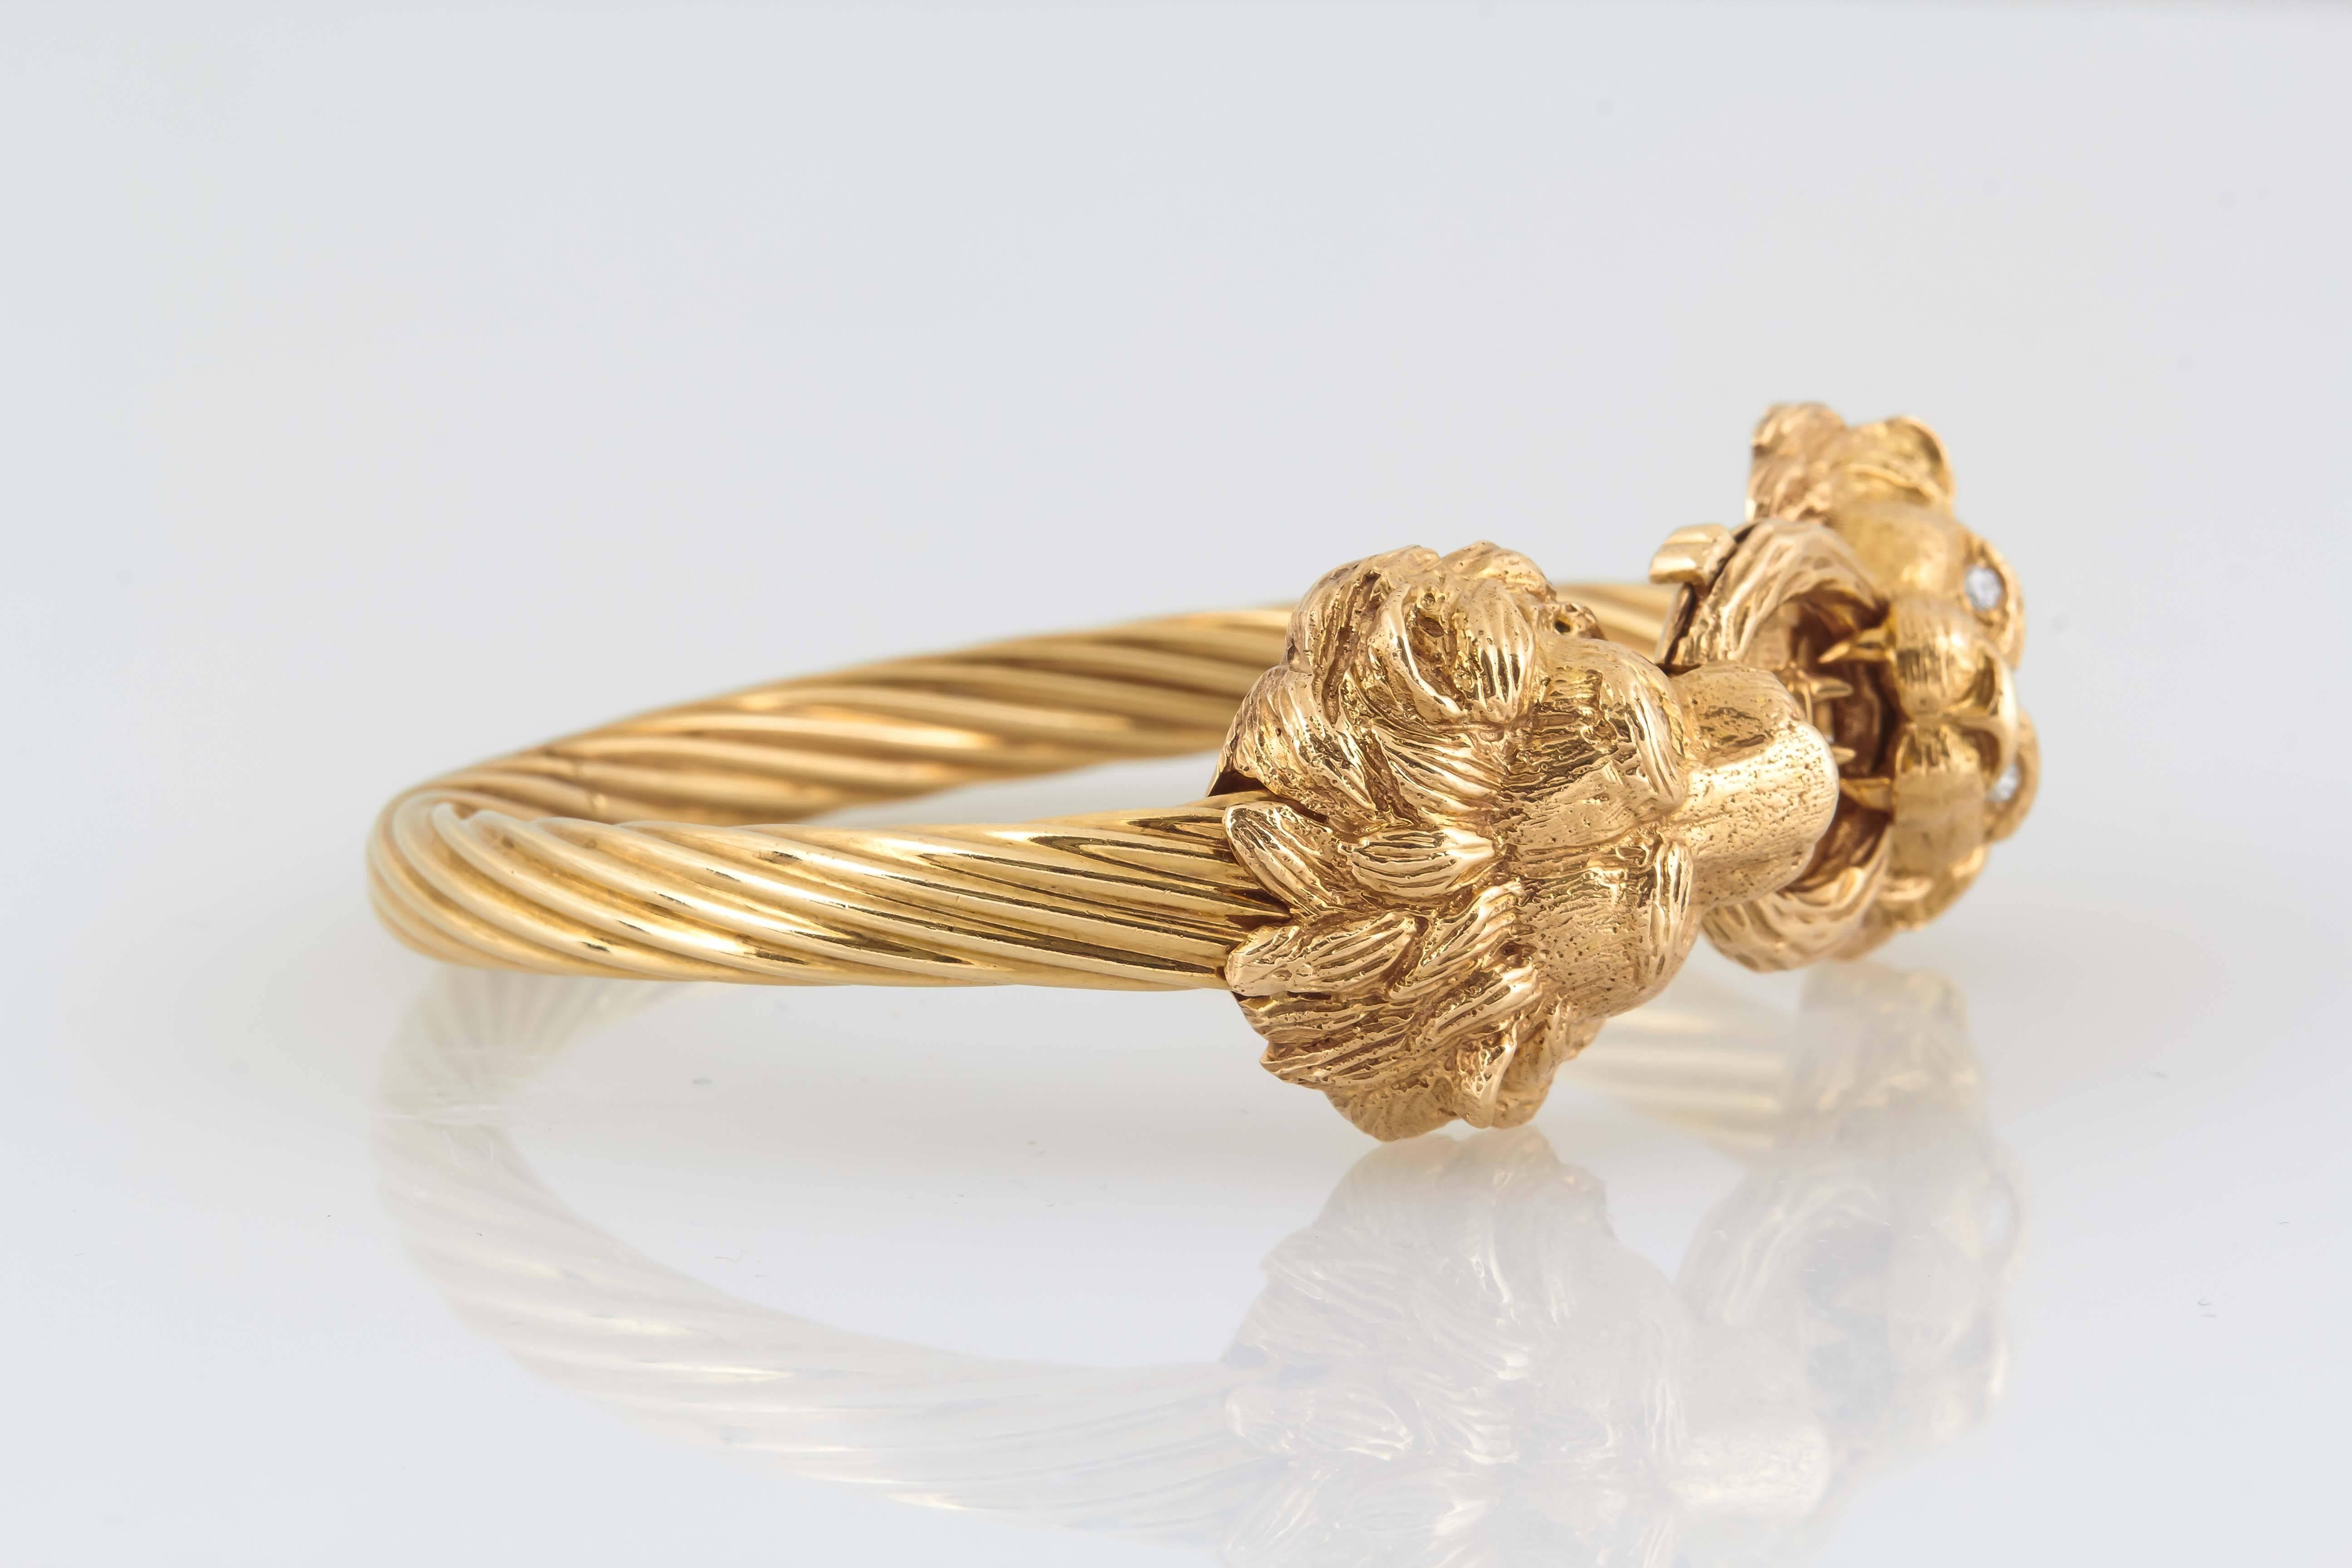 Van Cleef & Arpels 14K gold hinged bangle clasped by two diamond eyed lions.